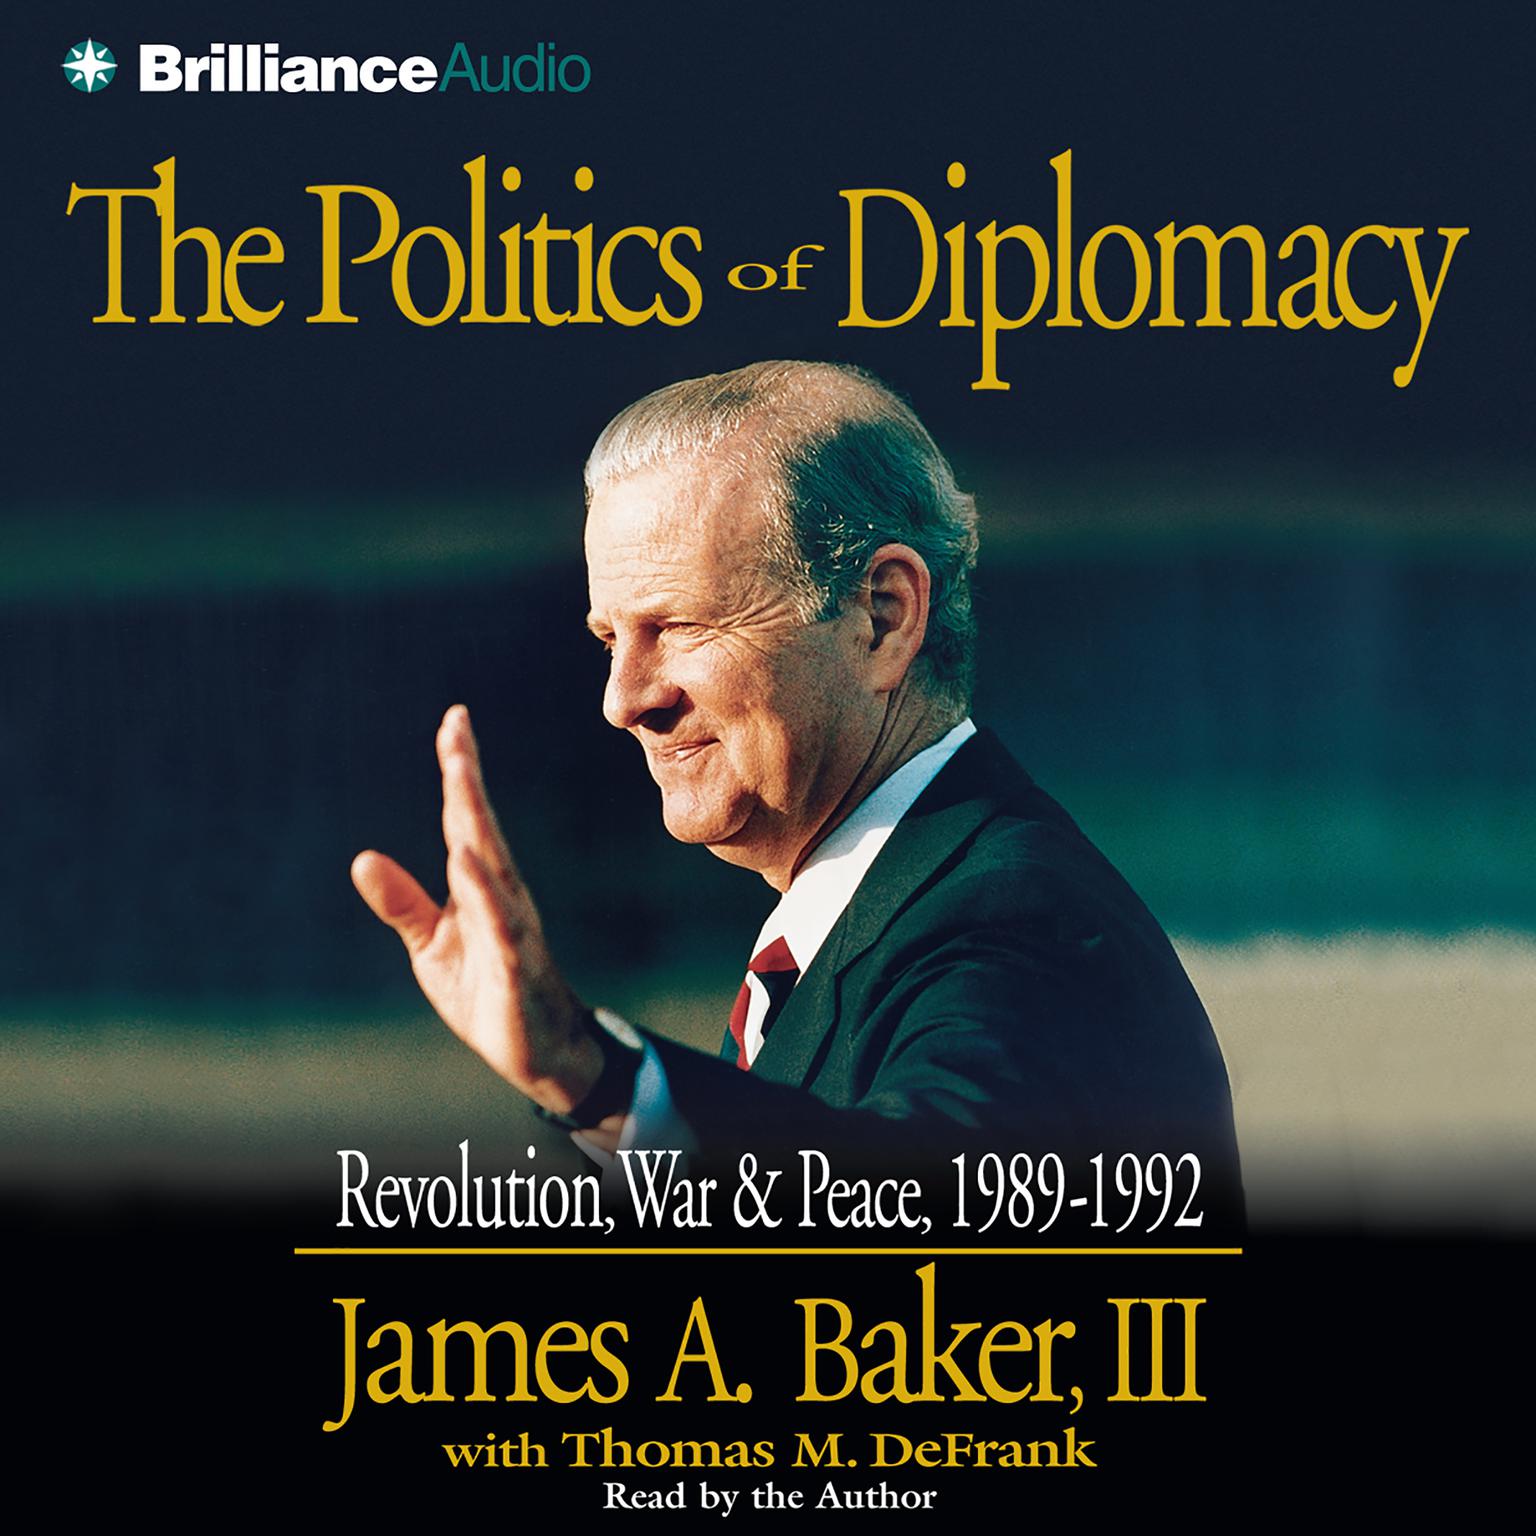 The Politics of Diplomacy (Abridged): Revolution, War, and Peace: 1989-1992 Audiobook, by James A. Baker